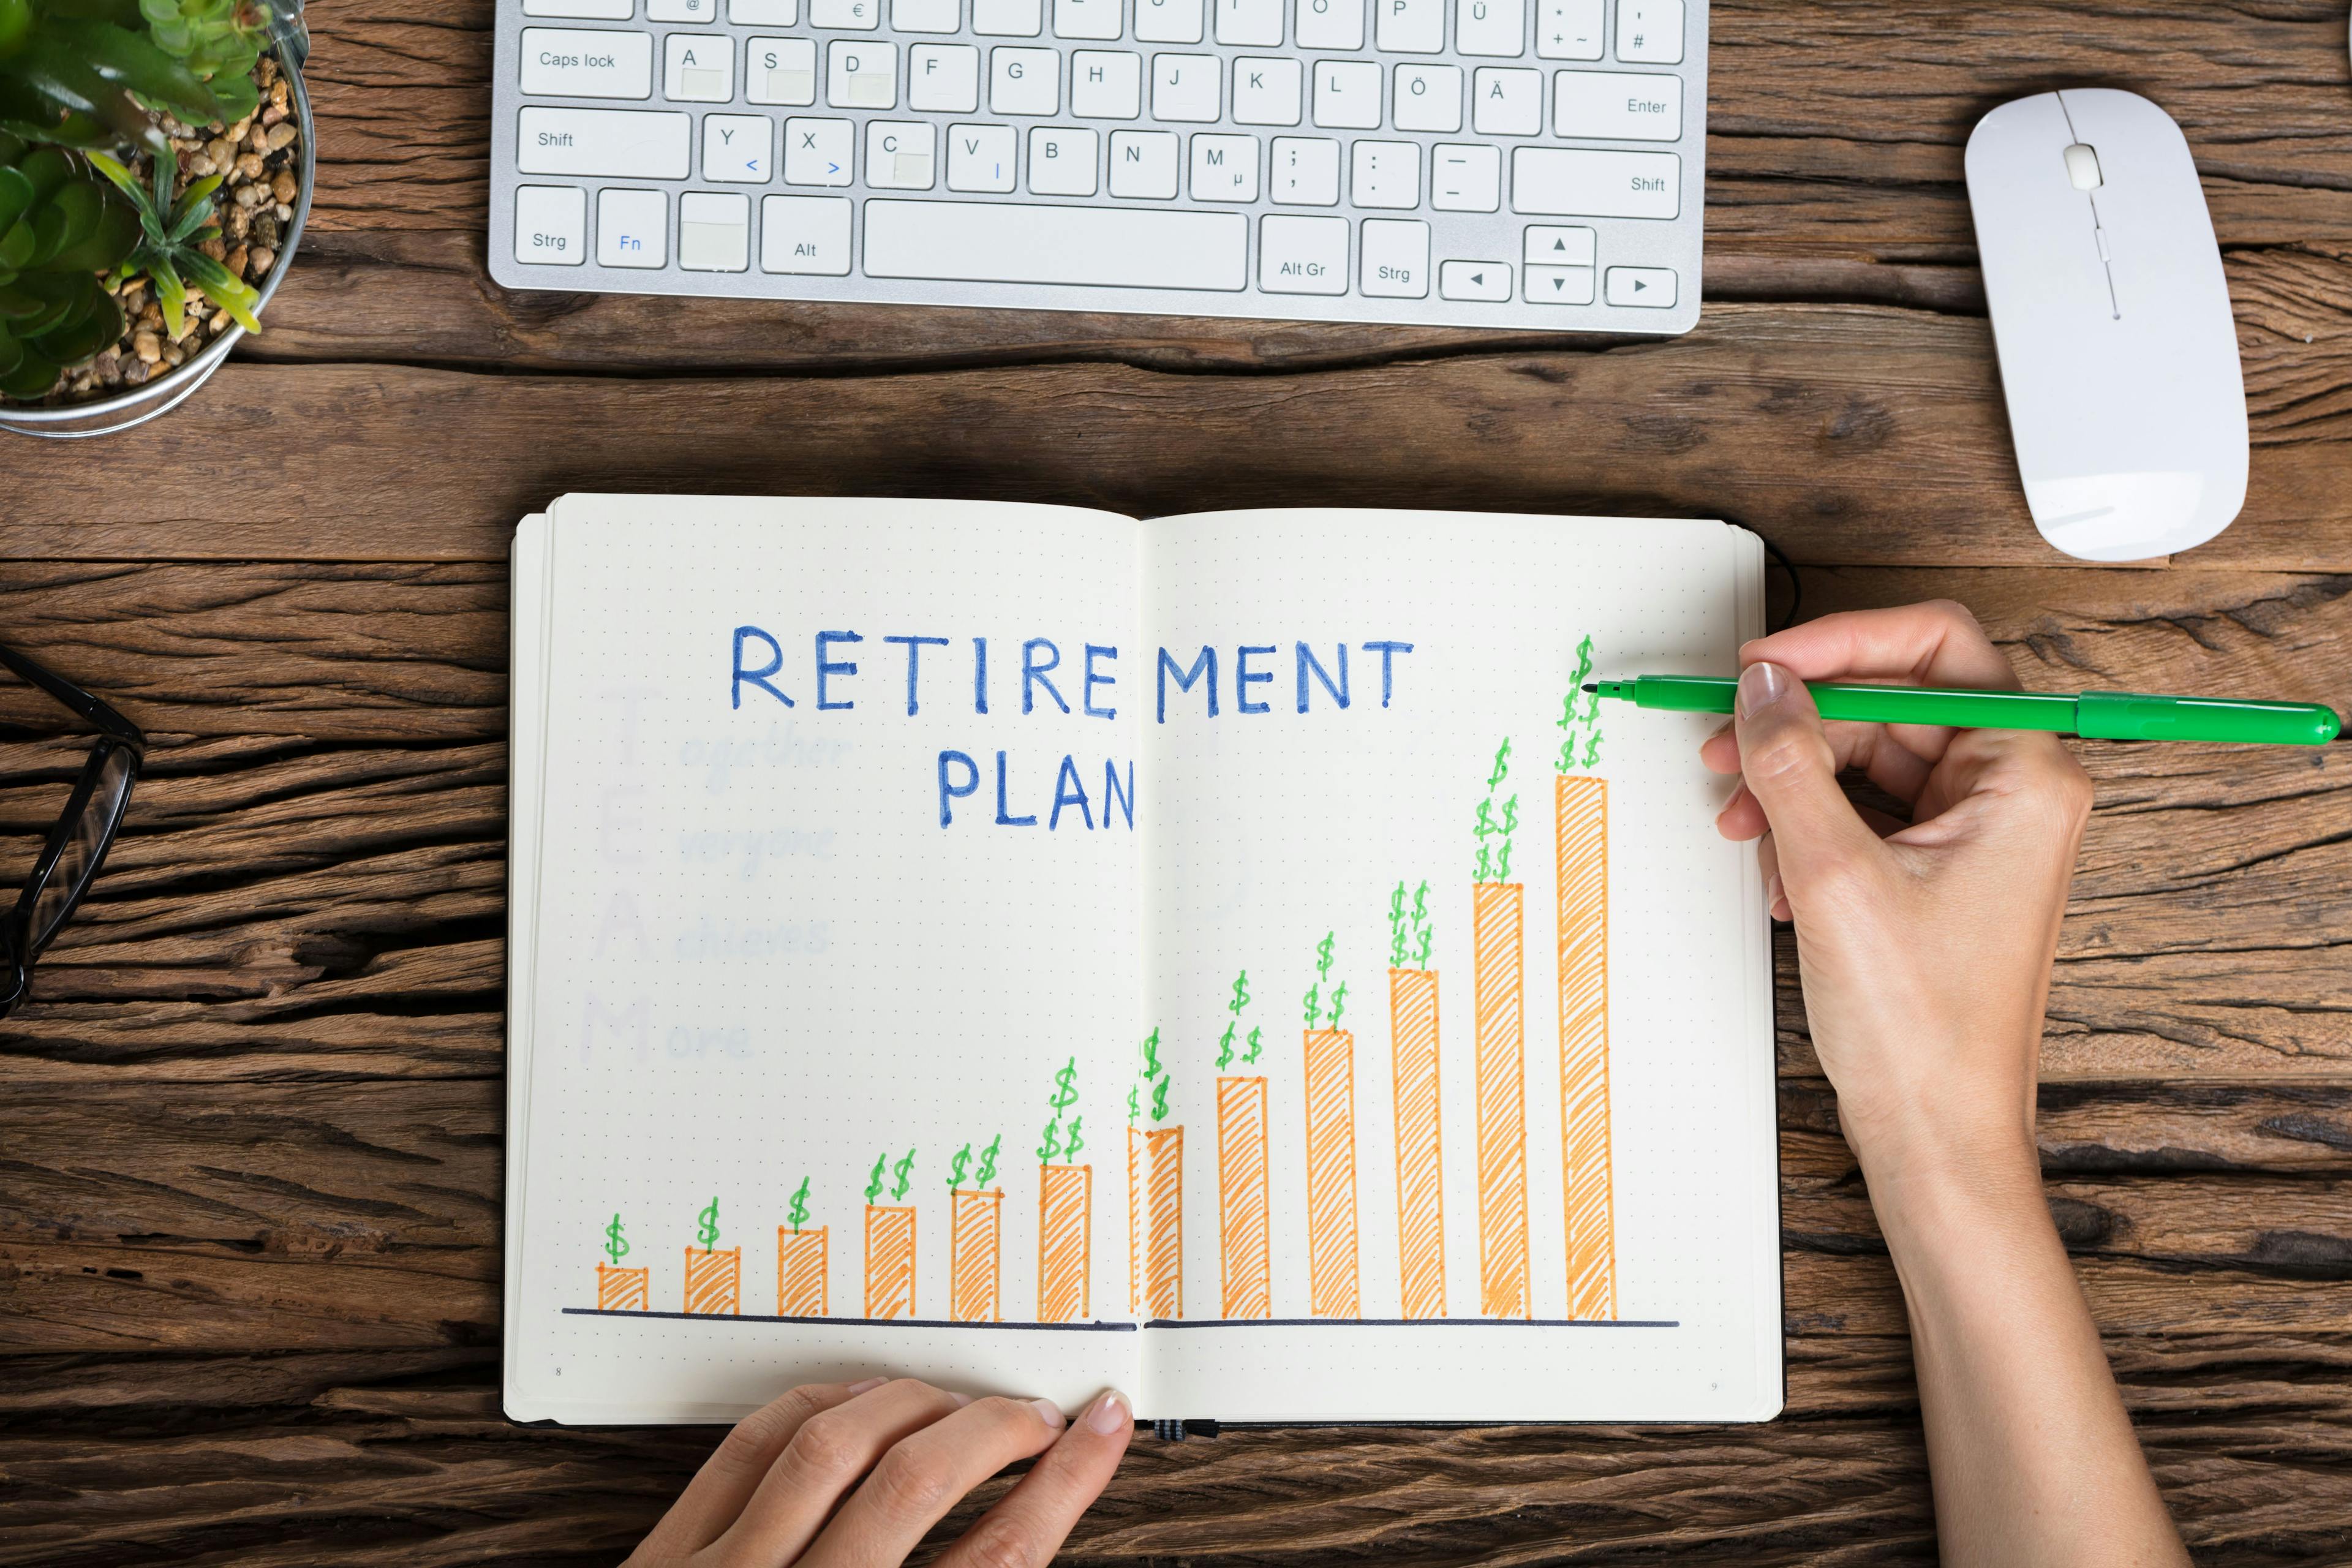 How much money do you need to retire?